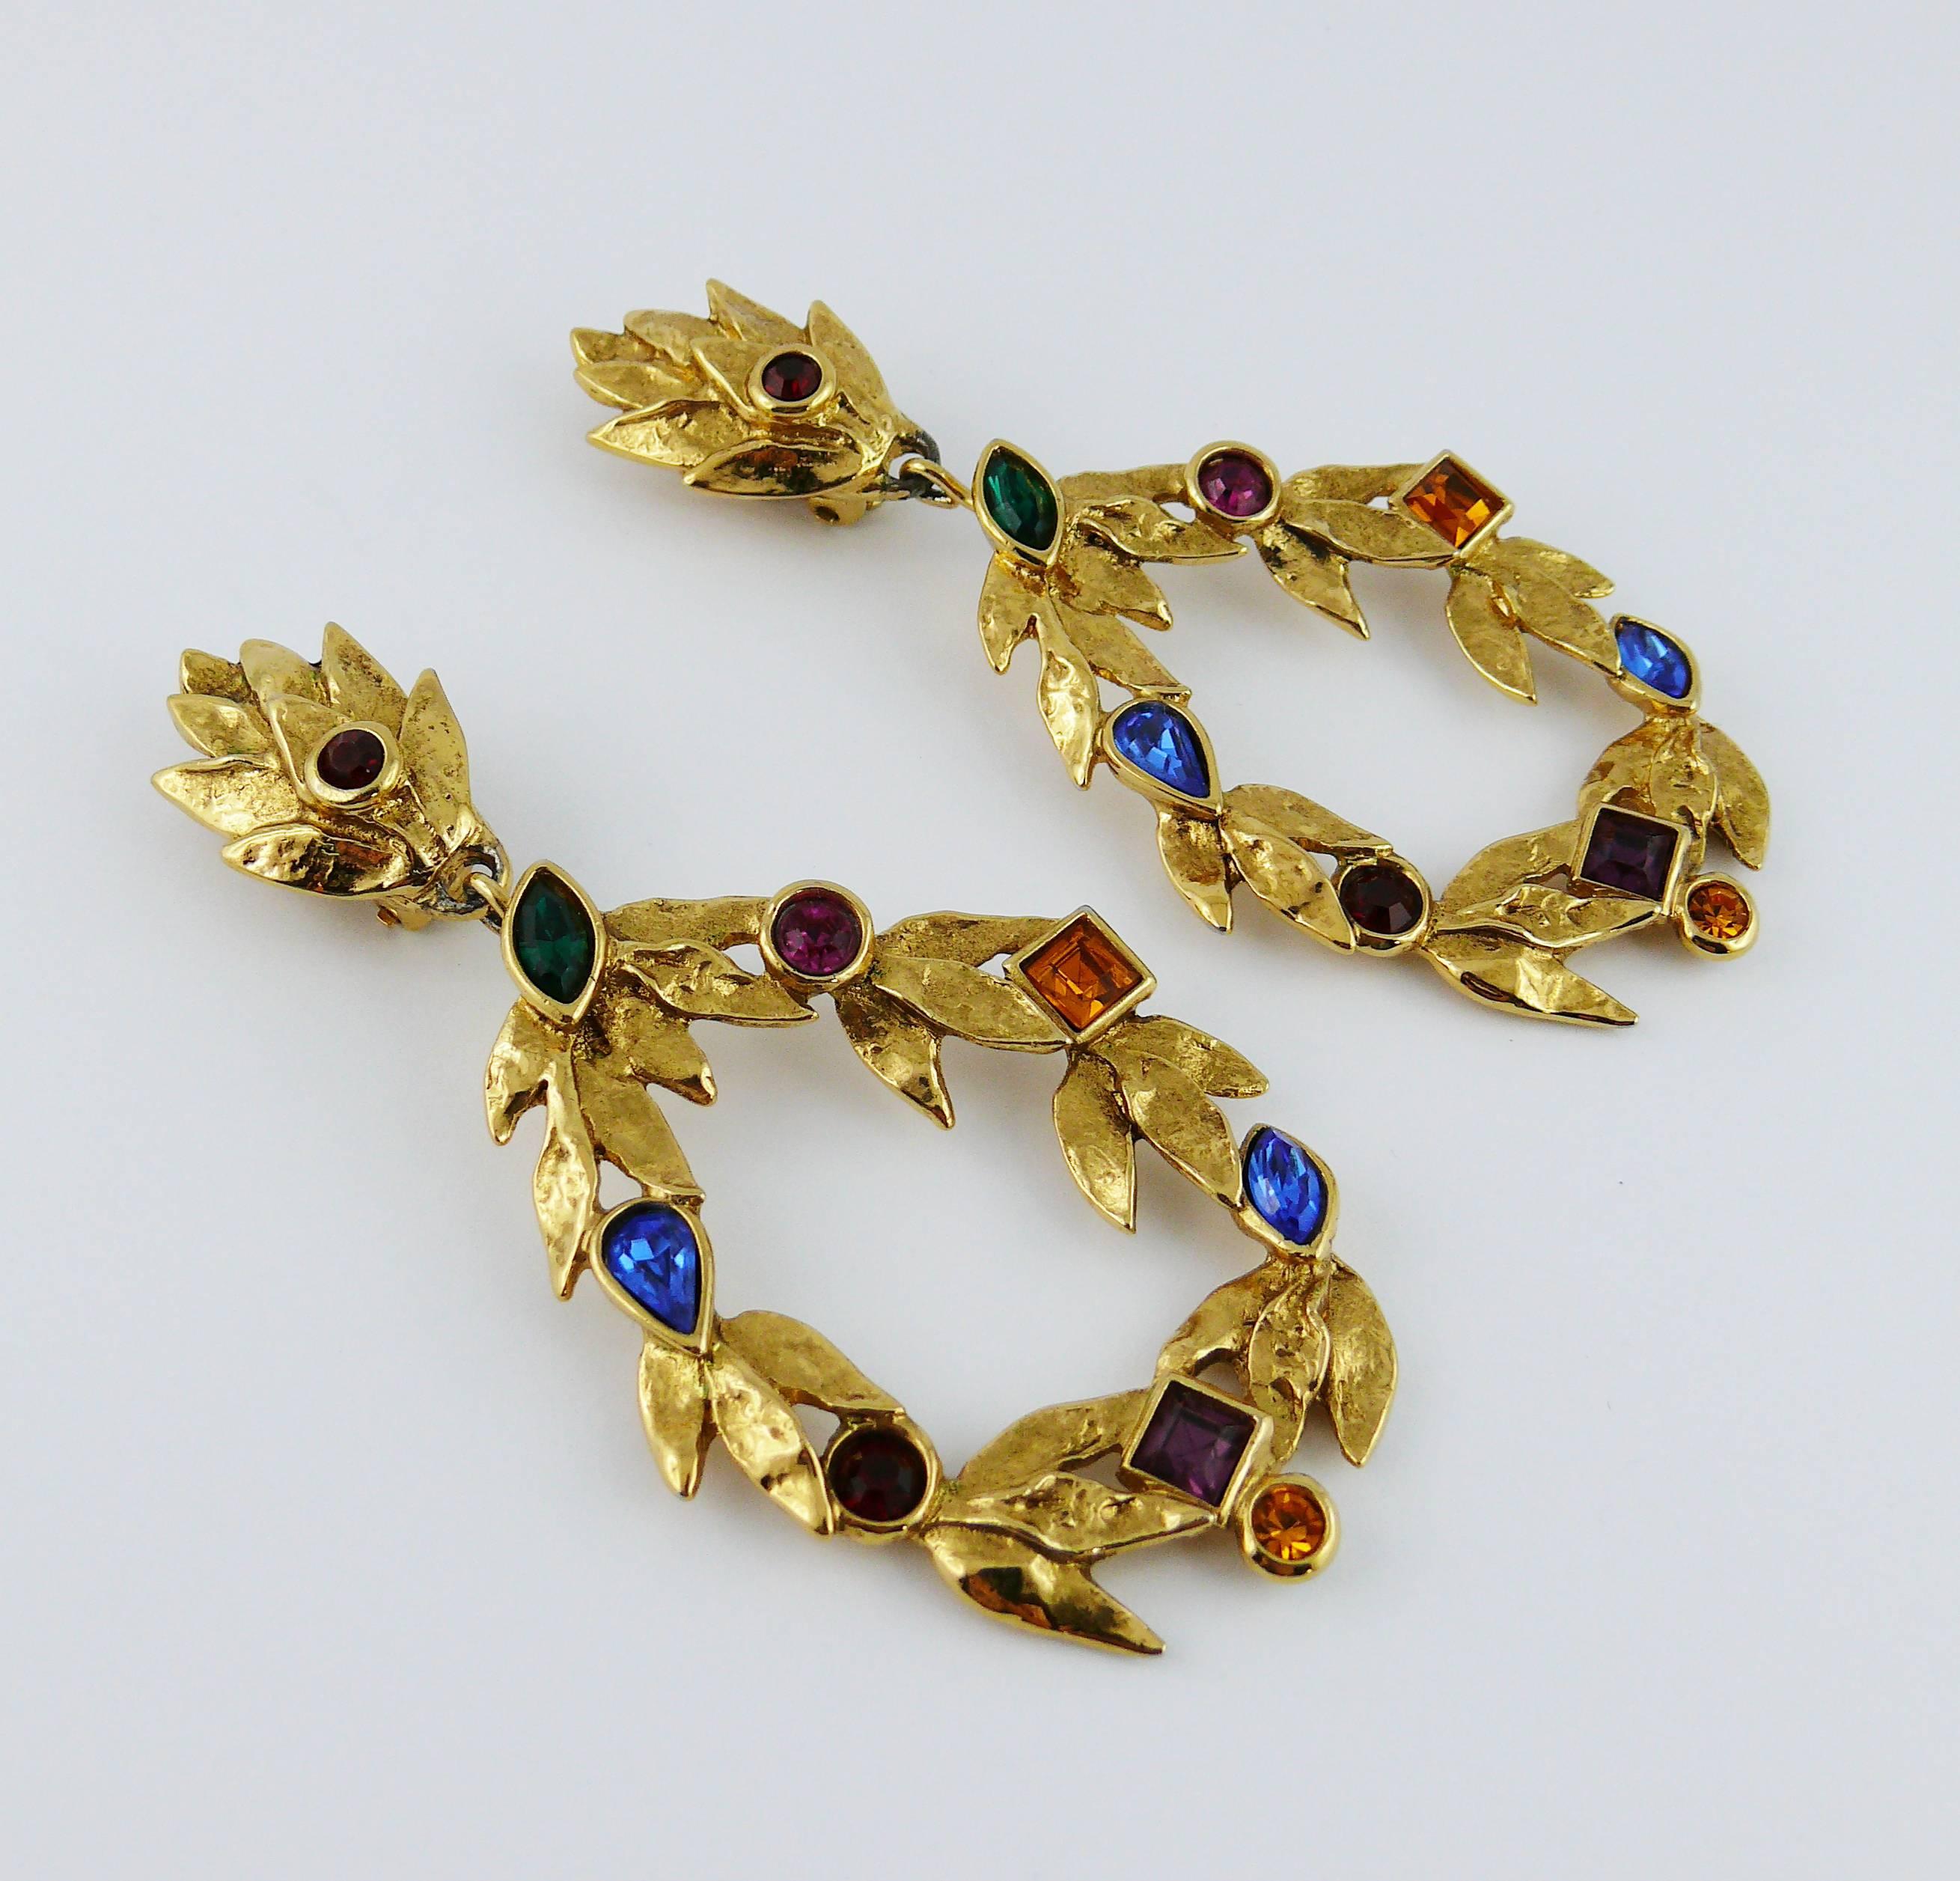 YVES SAINT LAURENT vintage dangling earrings (clip-on) and brooch set featuring gold toned laurel wreath with multicolored embellishement.

Marked YSL Made in France.

EARRINGS indicative measurements : length approx. 9 cm (3.54 inches) / max. width